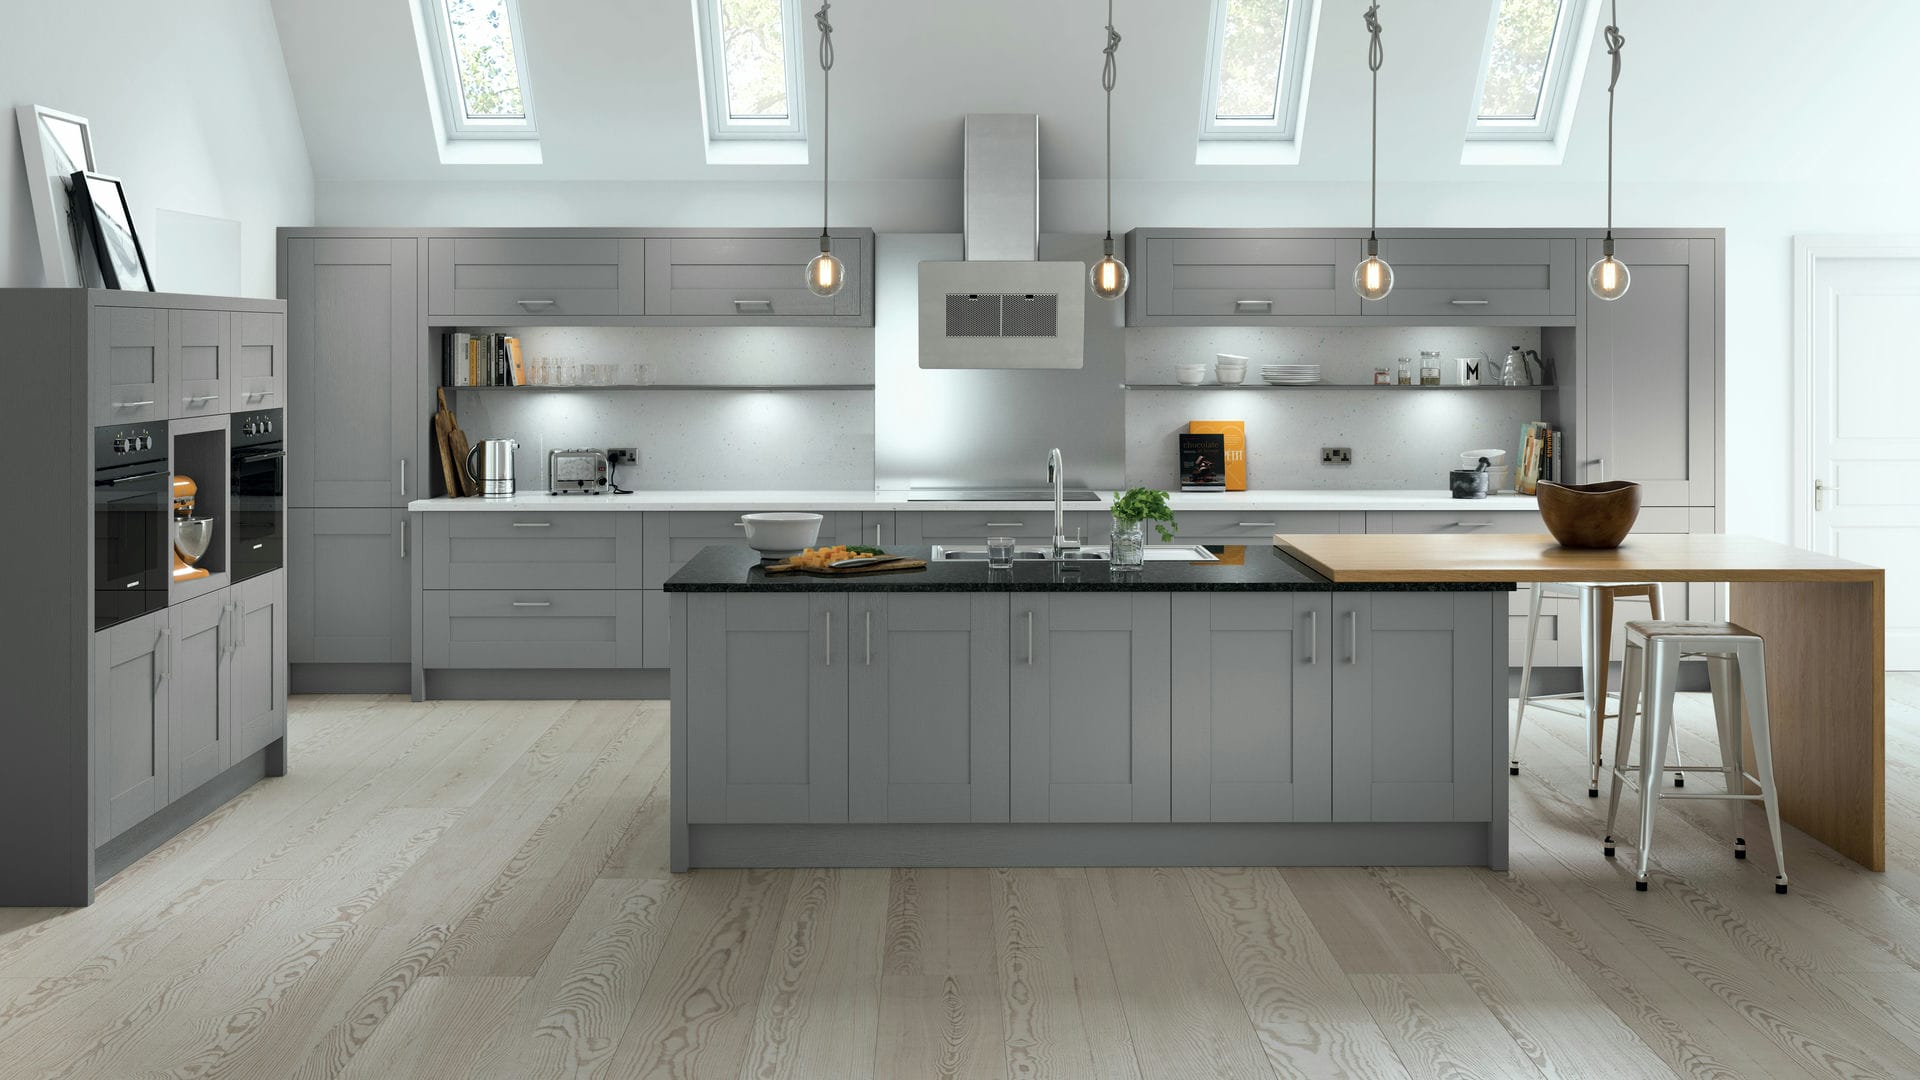 Luxury shaker dust grey kitchens combining the classic shaker look with a luxurious dust grey shade